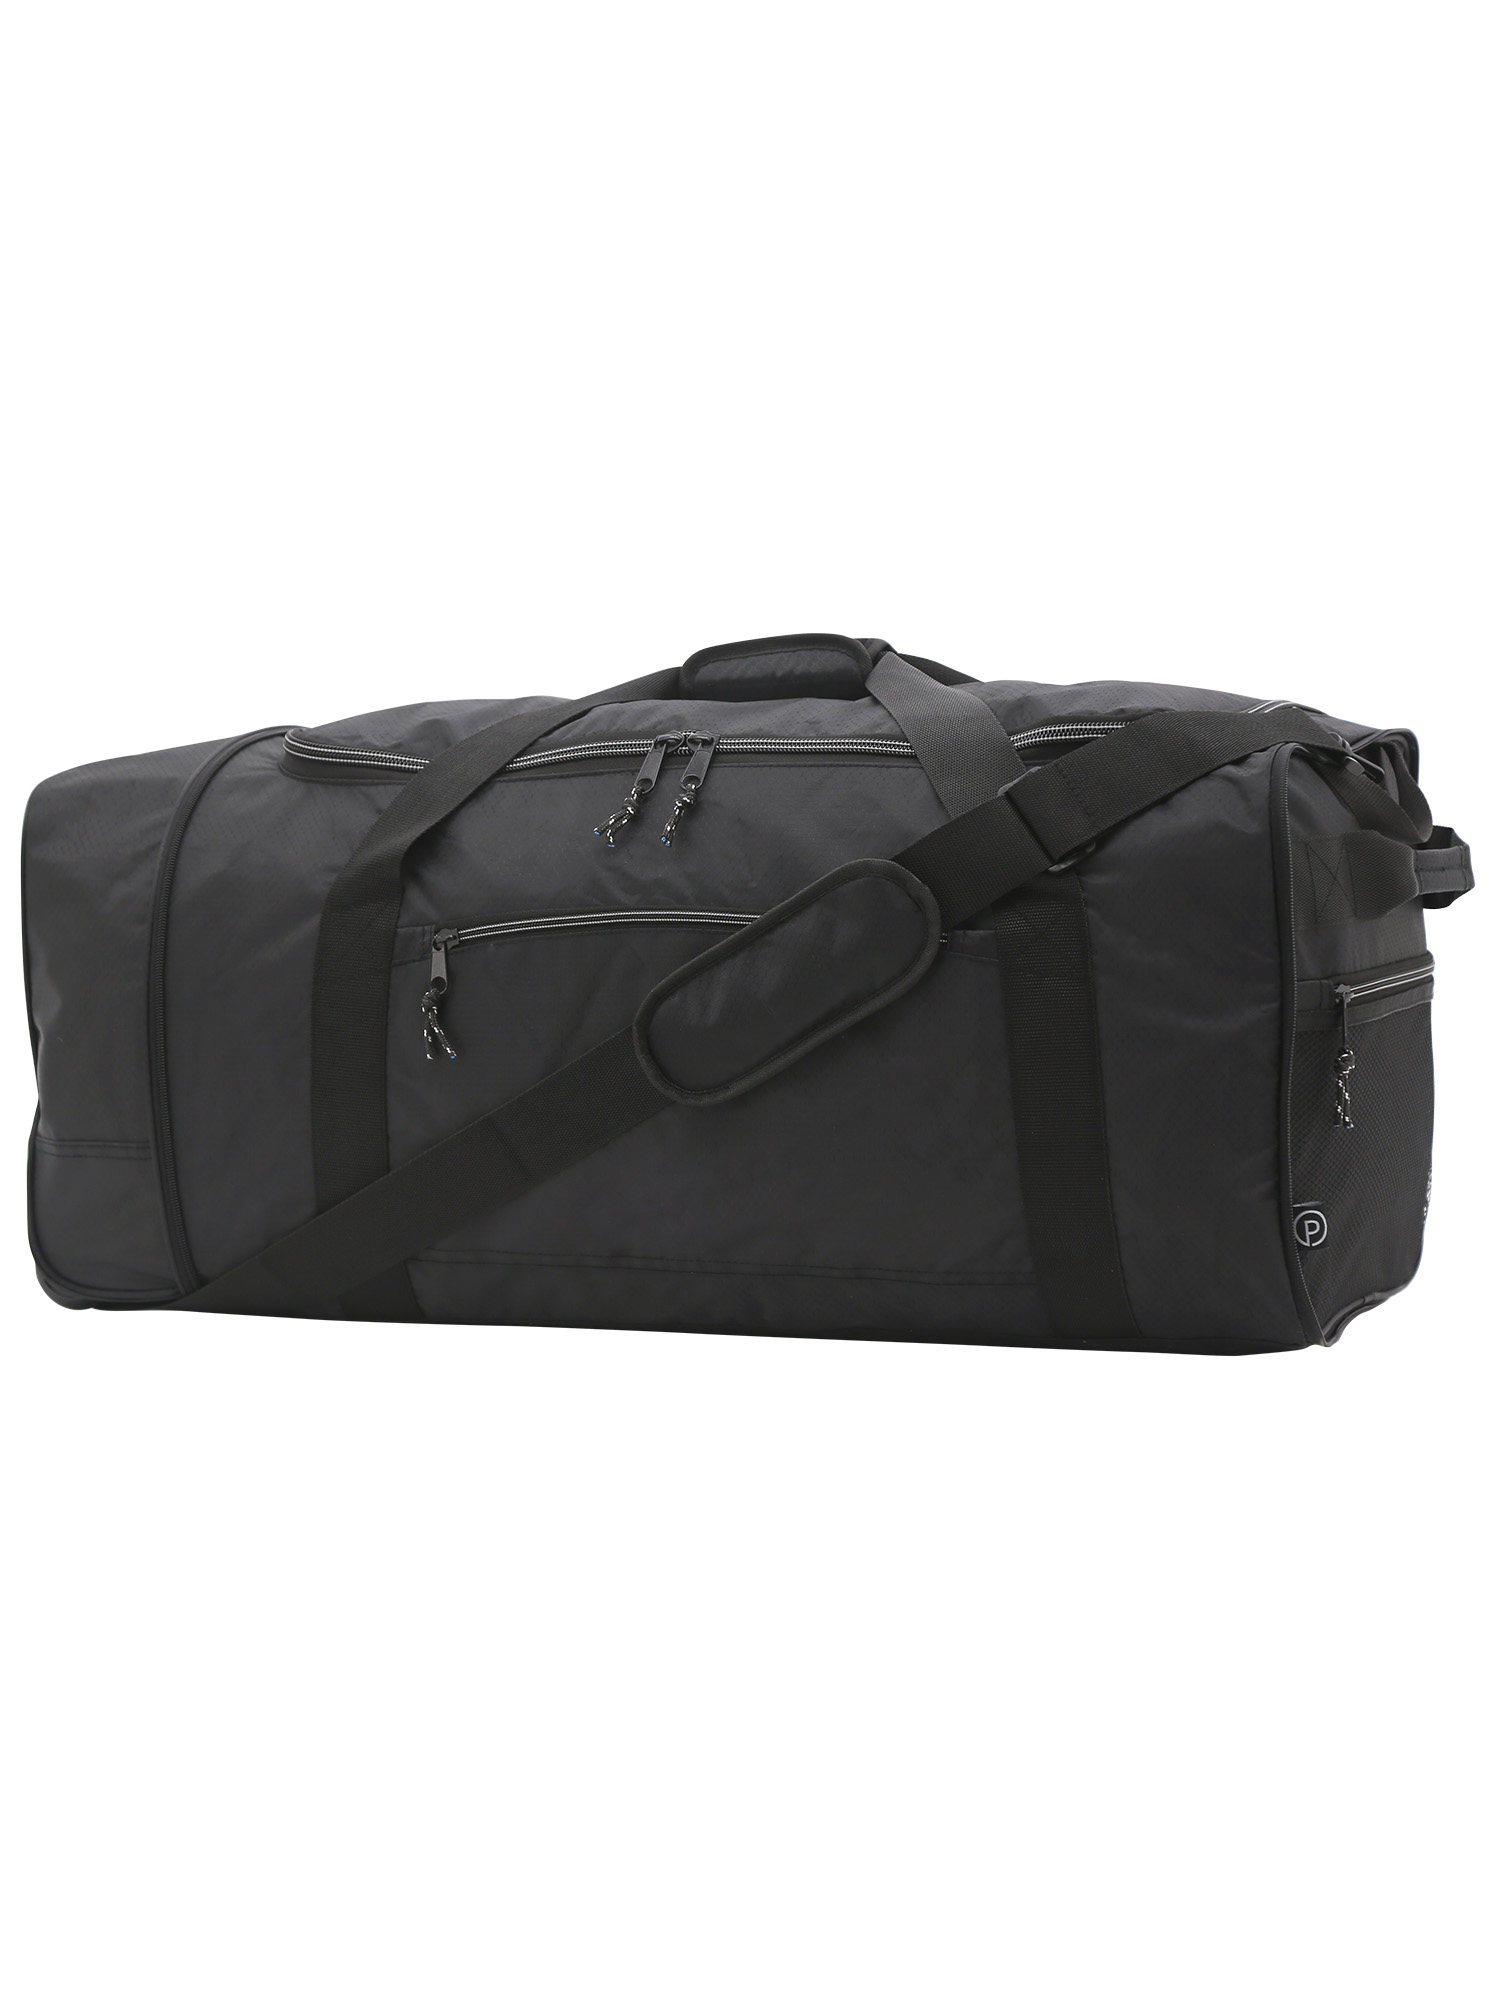 Protege 32" Wheeled and Compactible Polyester Rolling Duffel Bag, Black - image 5 of 8